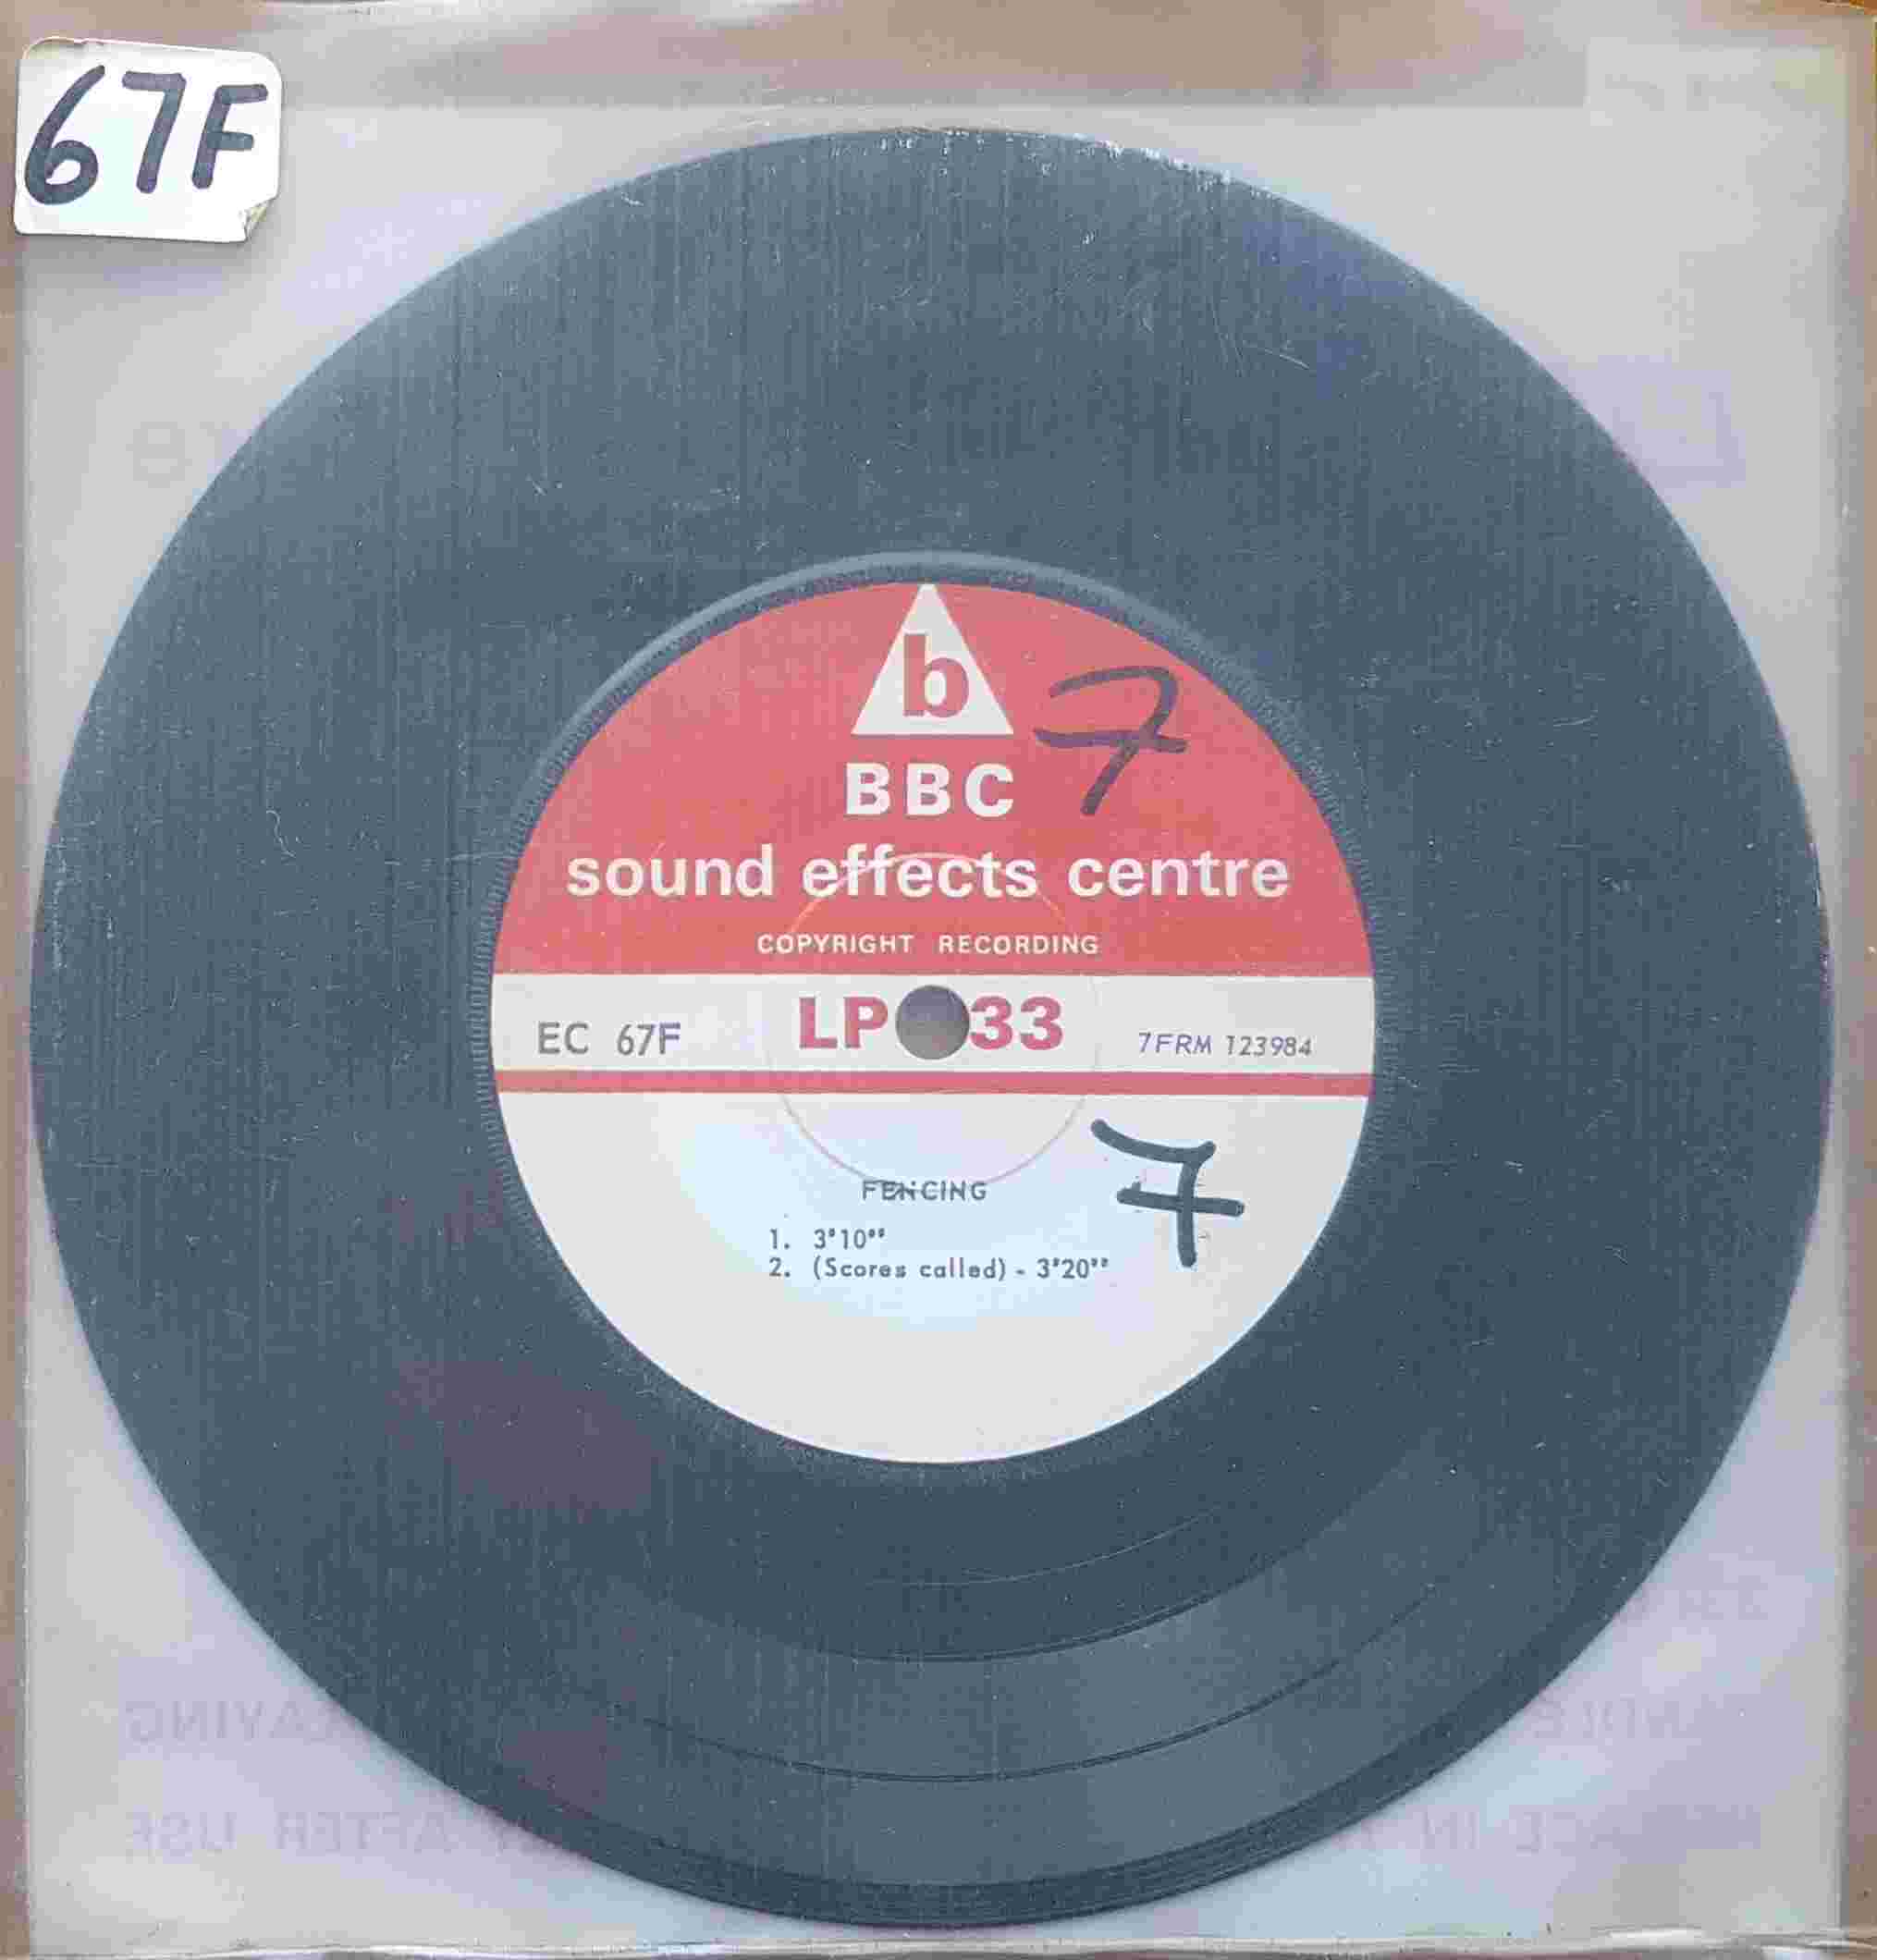 Picture of EC 67F Squash / Fencing by artist Not registered from the BBC records and Tapes library